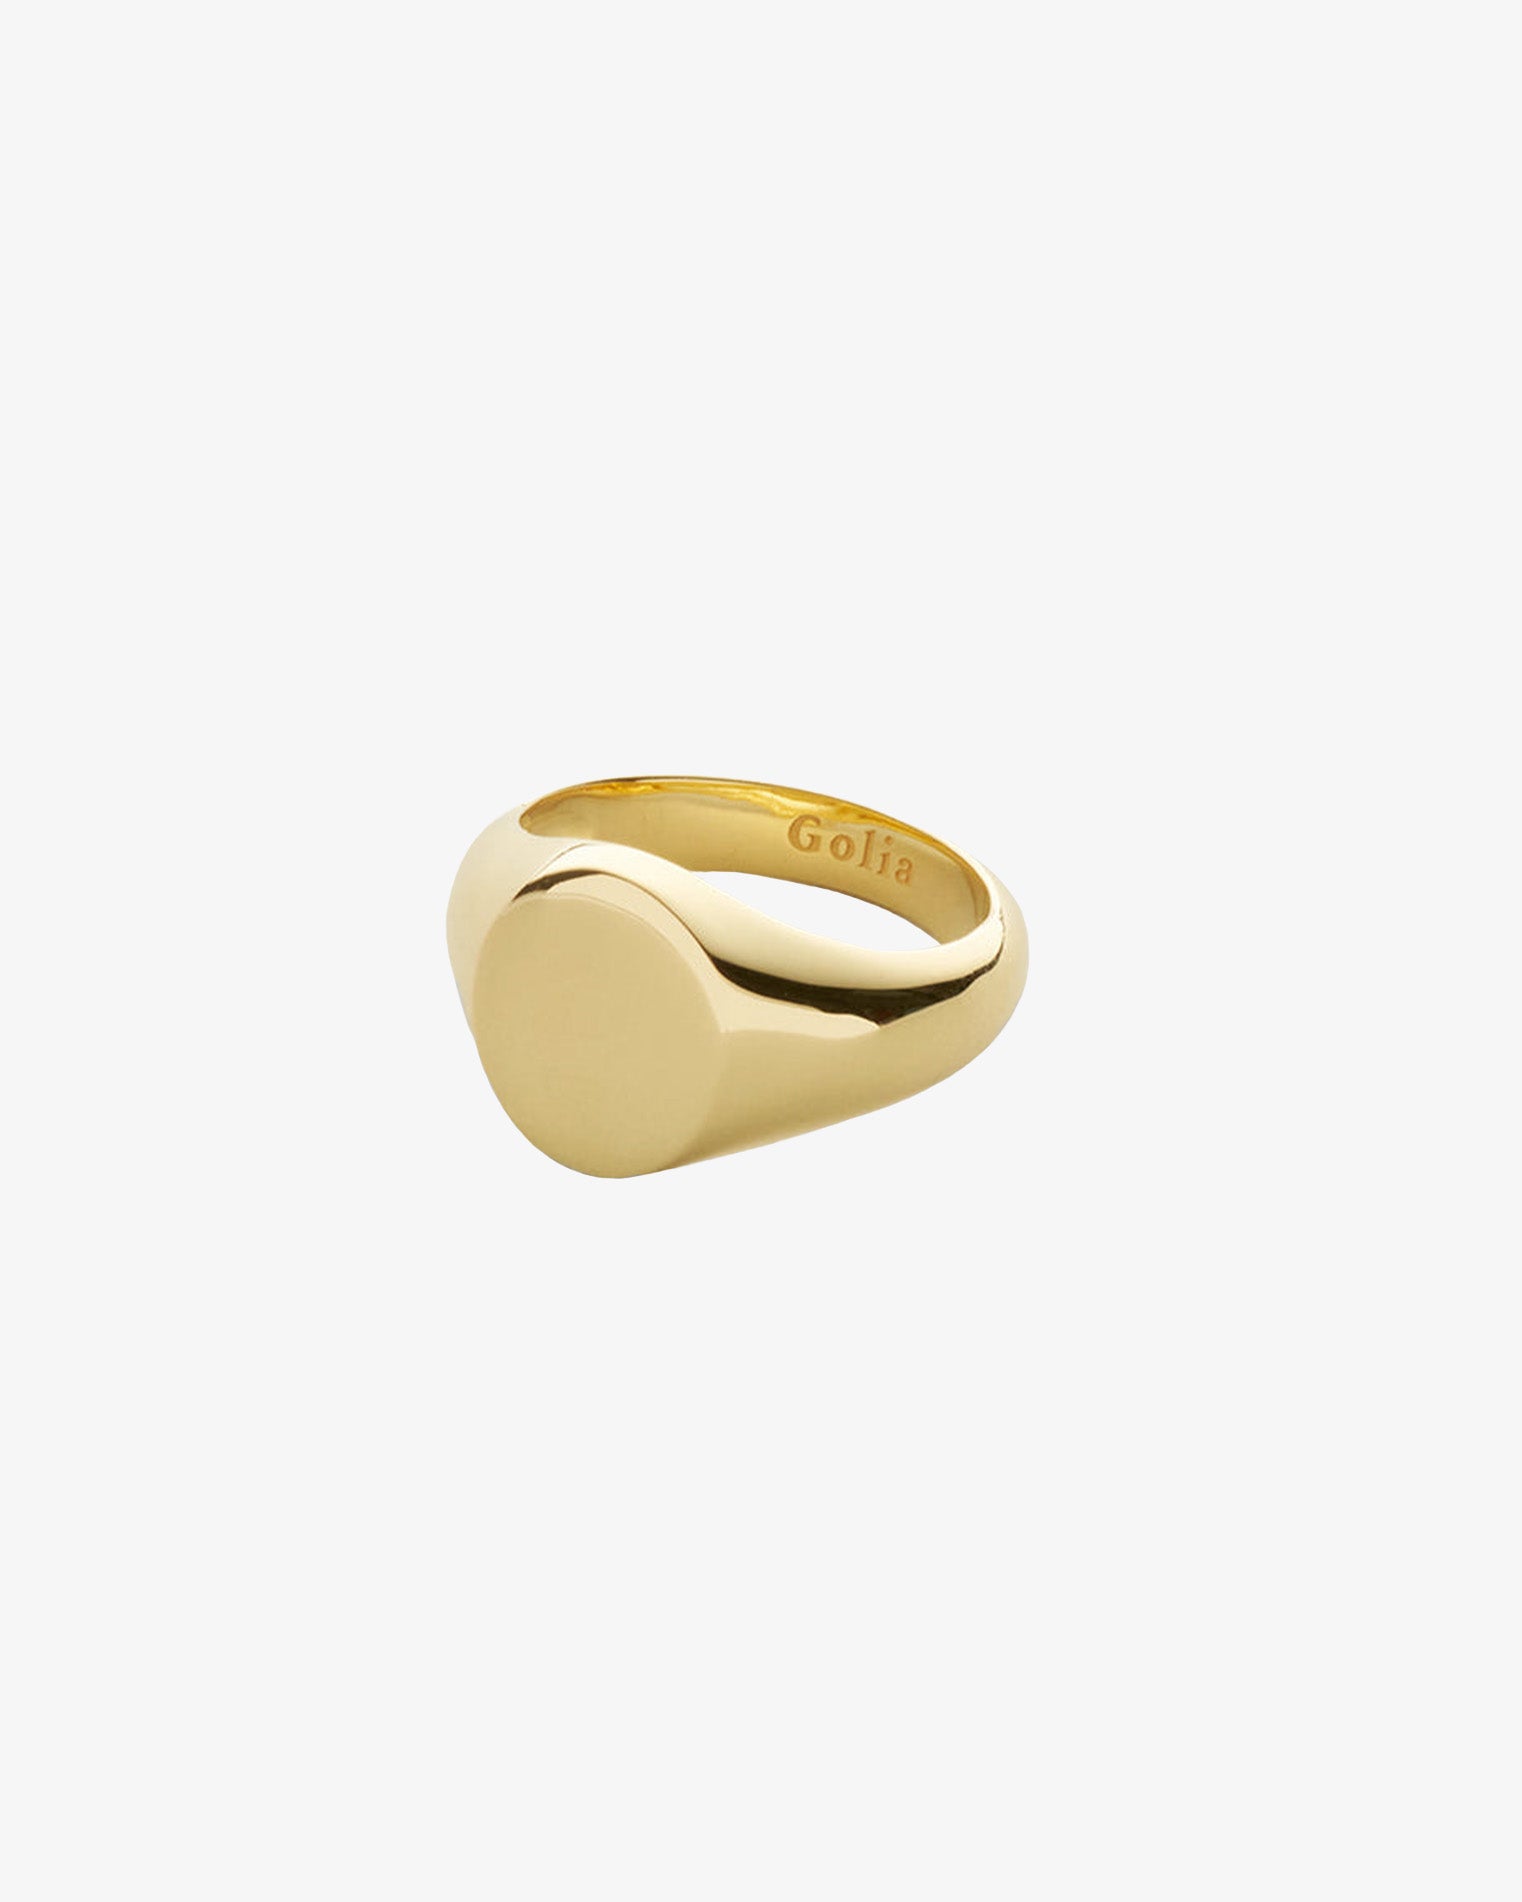 Maha - Golia Cookie Ring Gold